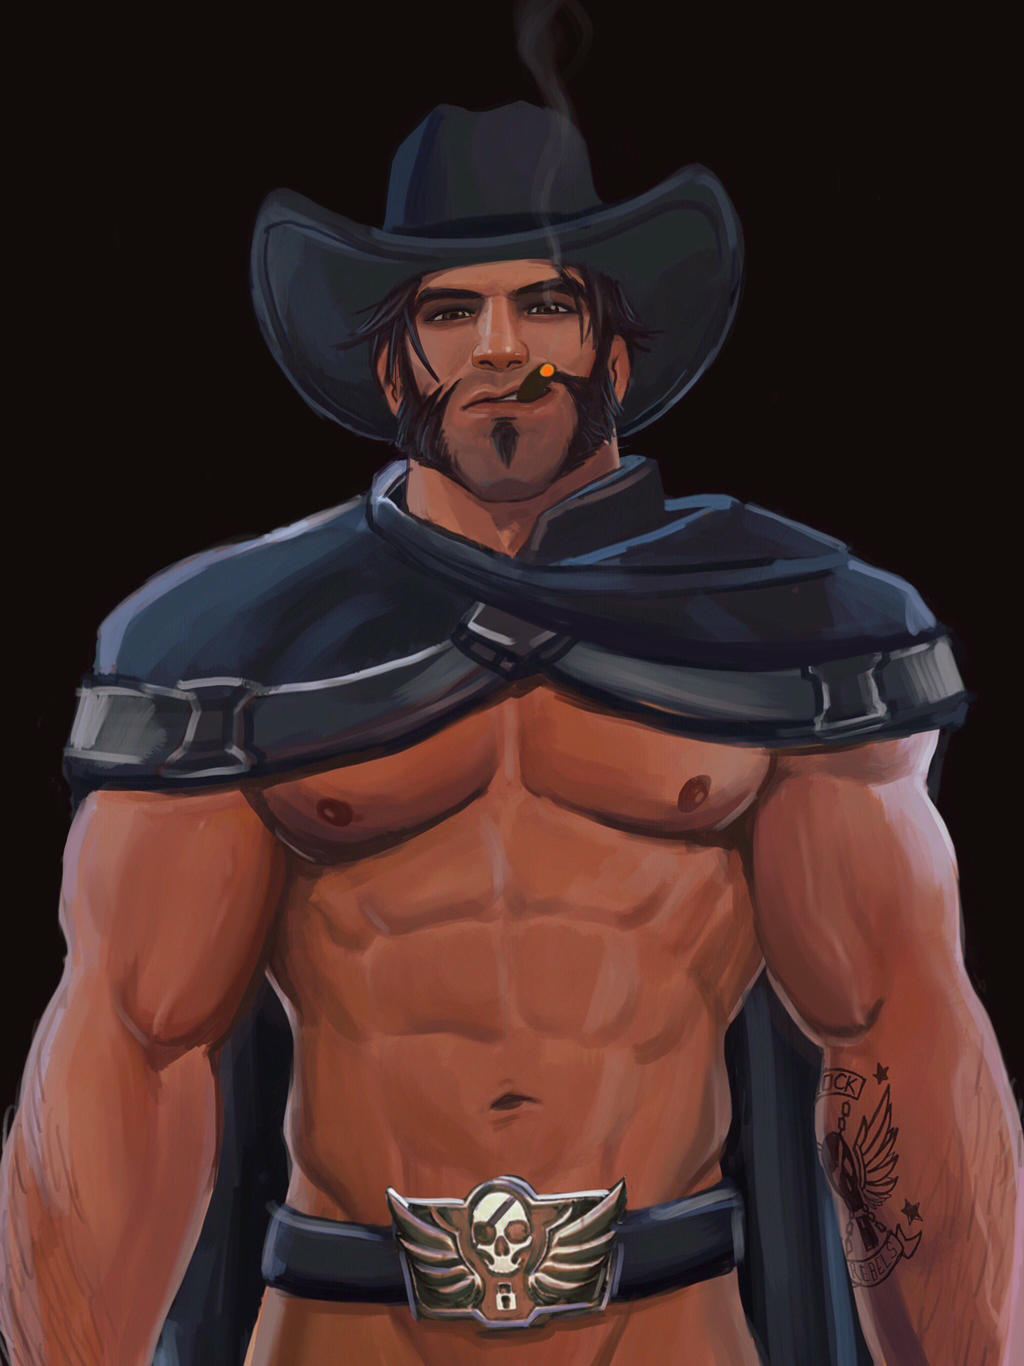 1366x1024 - Submitted 4 years ago * by doctawordchibi mccree. 